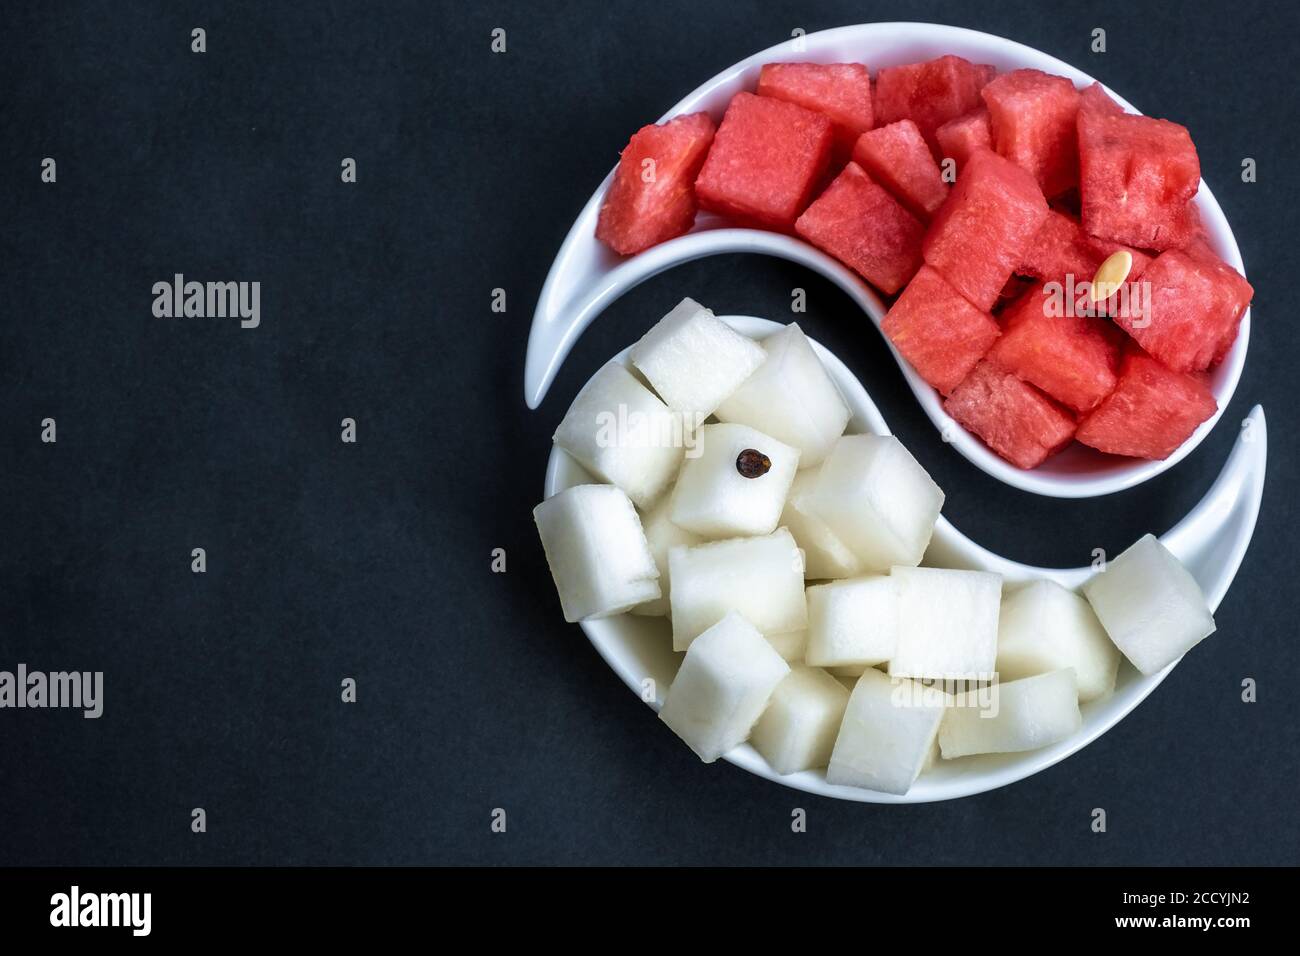 Ripe watermelon and melon, cut into cubes, are laid out on a yin-yang dish on a black background. Juicy, ripe summer fruits. Bright light. Copy space. Stock Photo